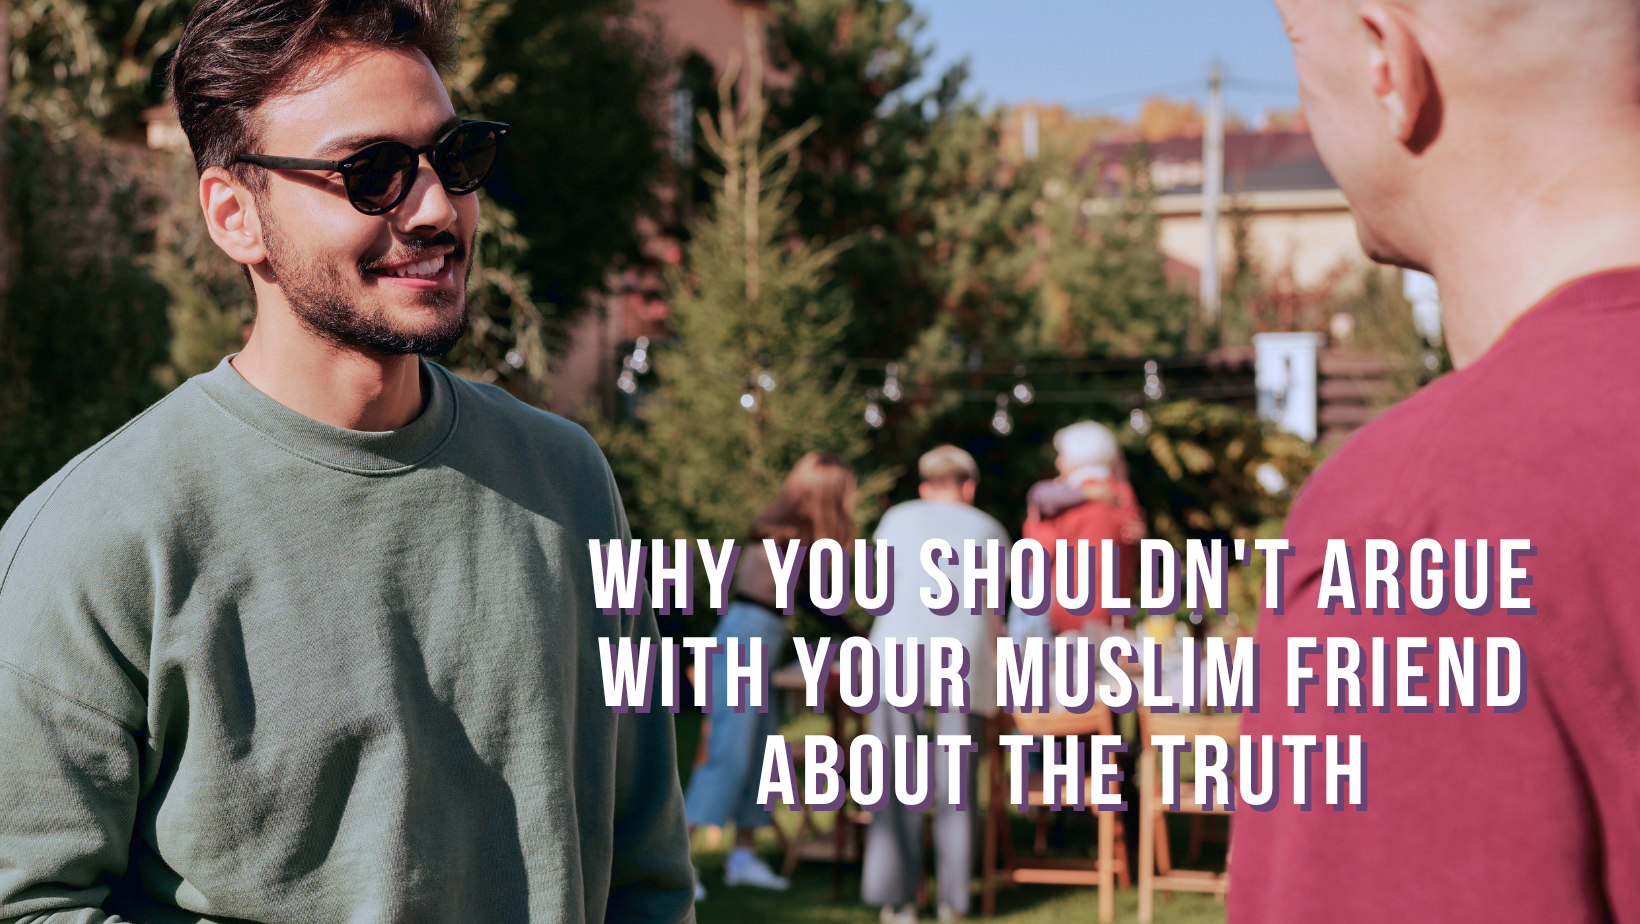 Why you shouldn't argue with your Muslim friend about the truth